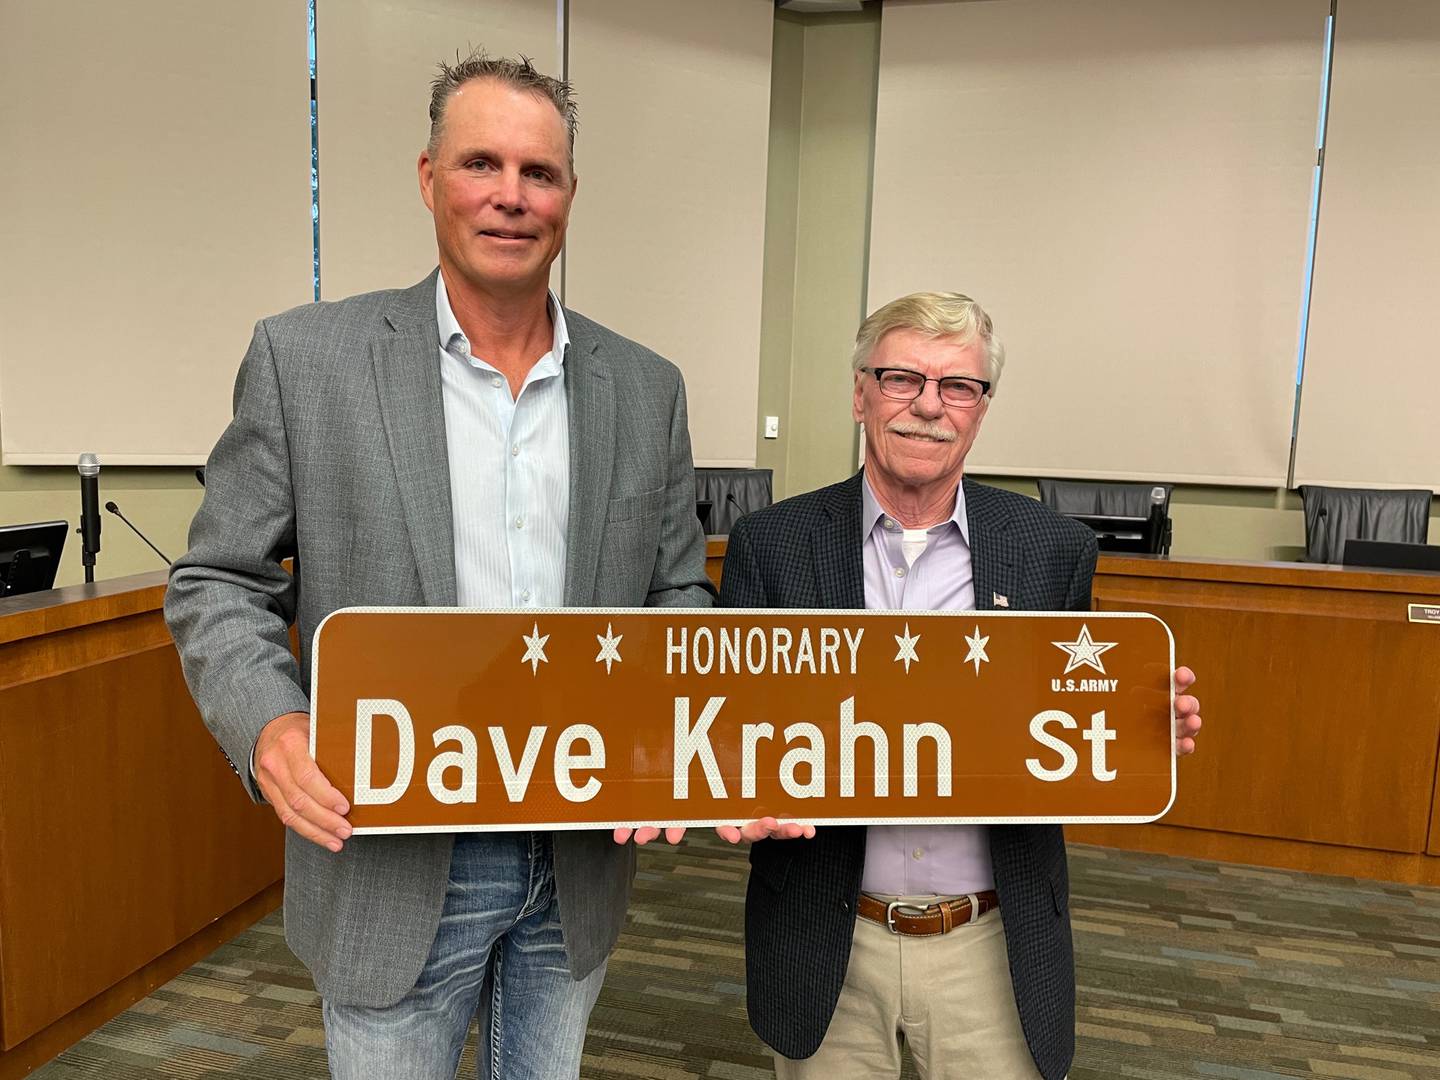 Oswego Village Board members honored long-time Village Official Dave Krahn with a street named after him at an Aug. 23 2022 Village Board meeting. (left to right: Village President Troy Parlier and Dave Krahn)